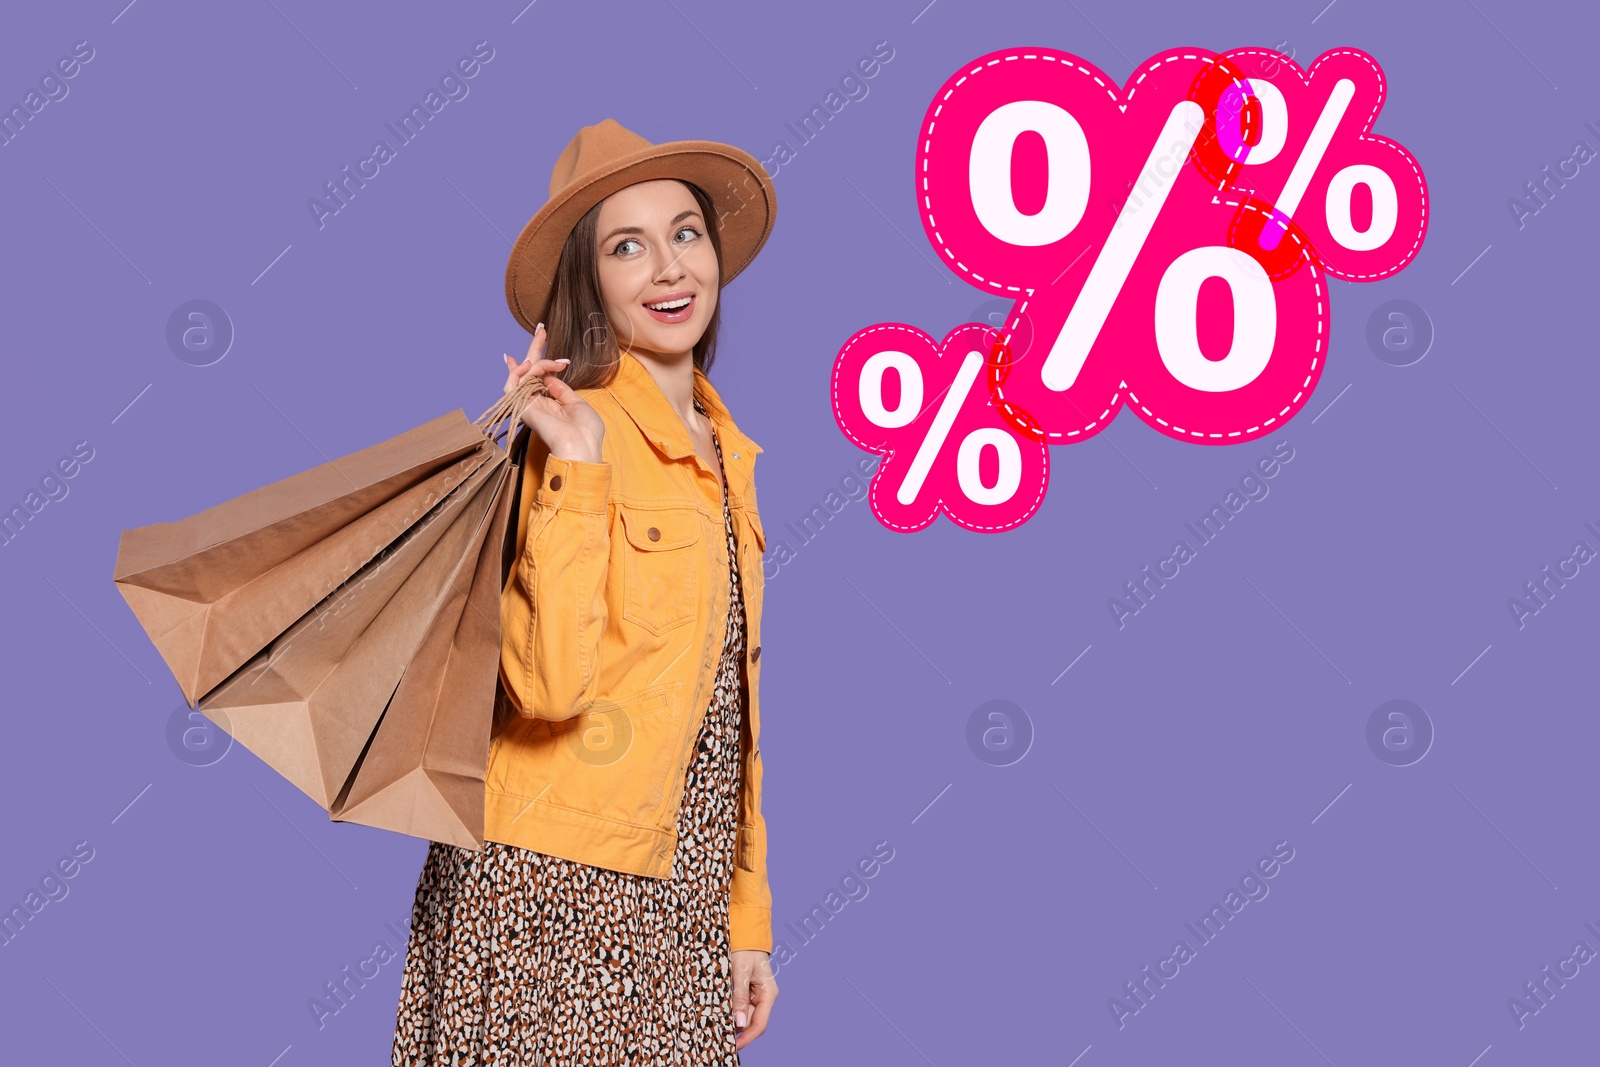 Image of Discount offer. Happy woman with paper shopping bags and illustrations of percent signs on purple background